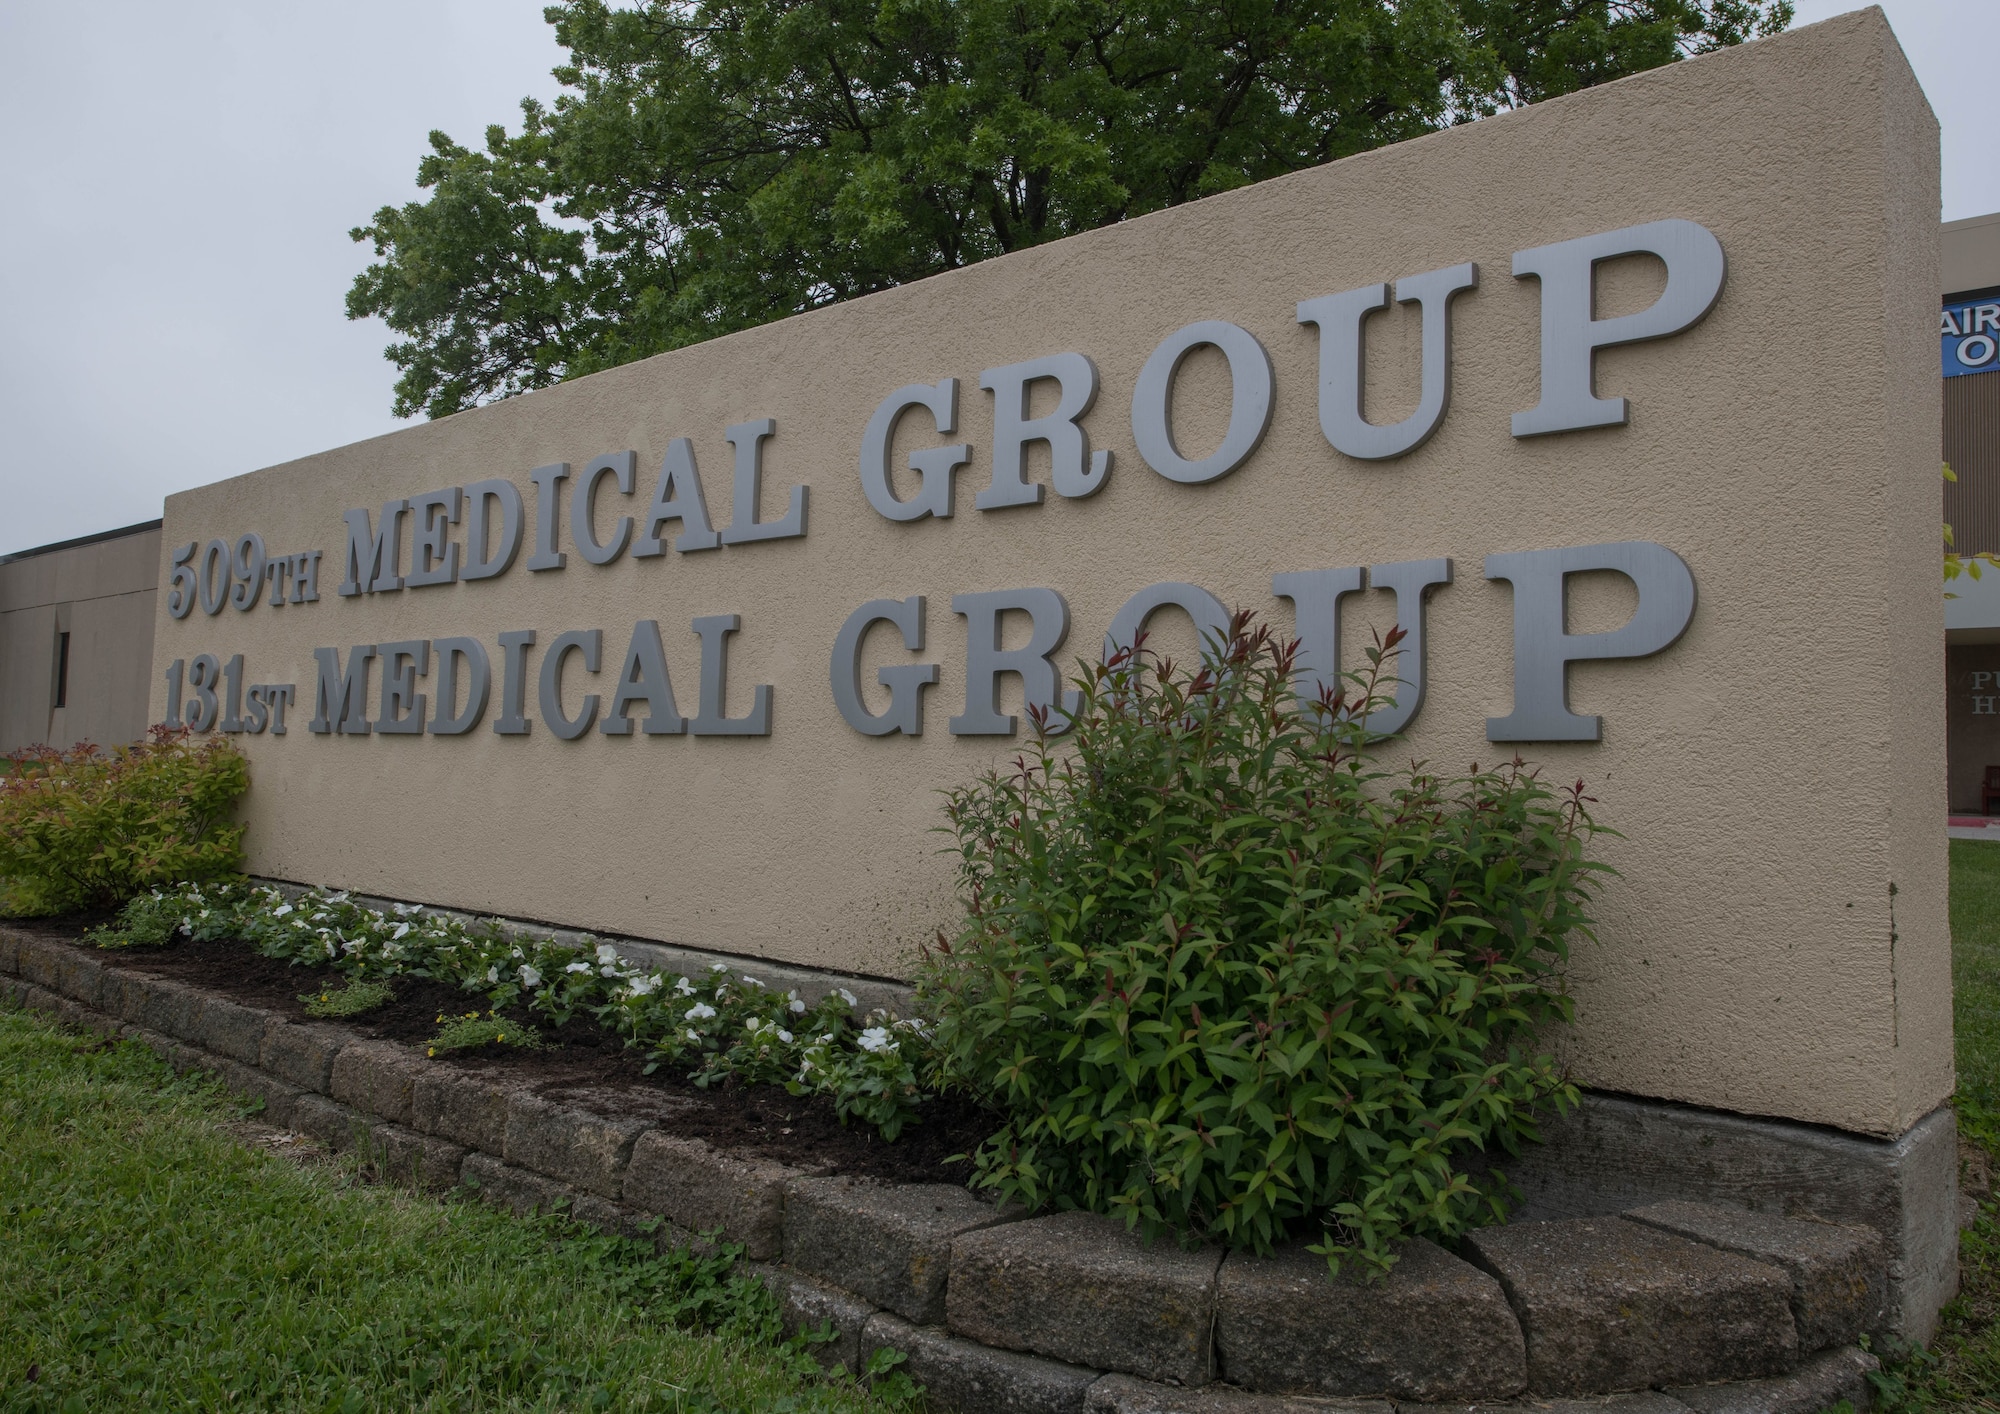 A sign displays the names of the 509th and 131st Medical Groups at Whiteman Air Force Base, Missouri, May 13, 2020. The 509th MDG implemented procedures and precautions to help mitigate the spread of COVID-19 on base and within the local community. (U.S. Air Force Photo by Senior Airman Thomas Johns)